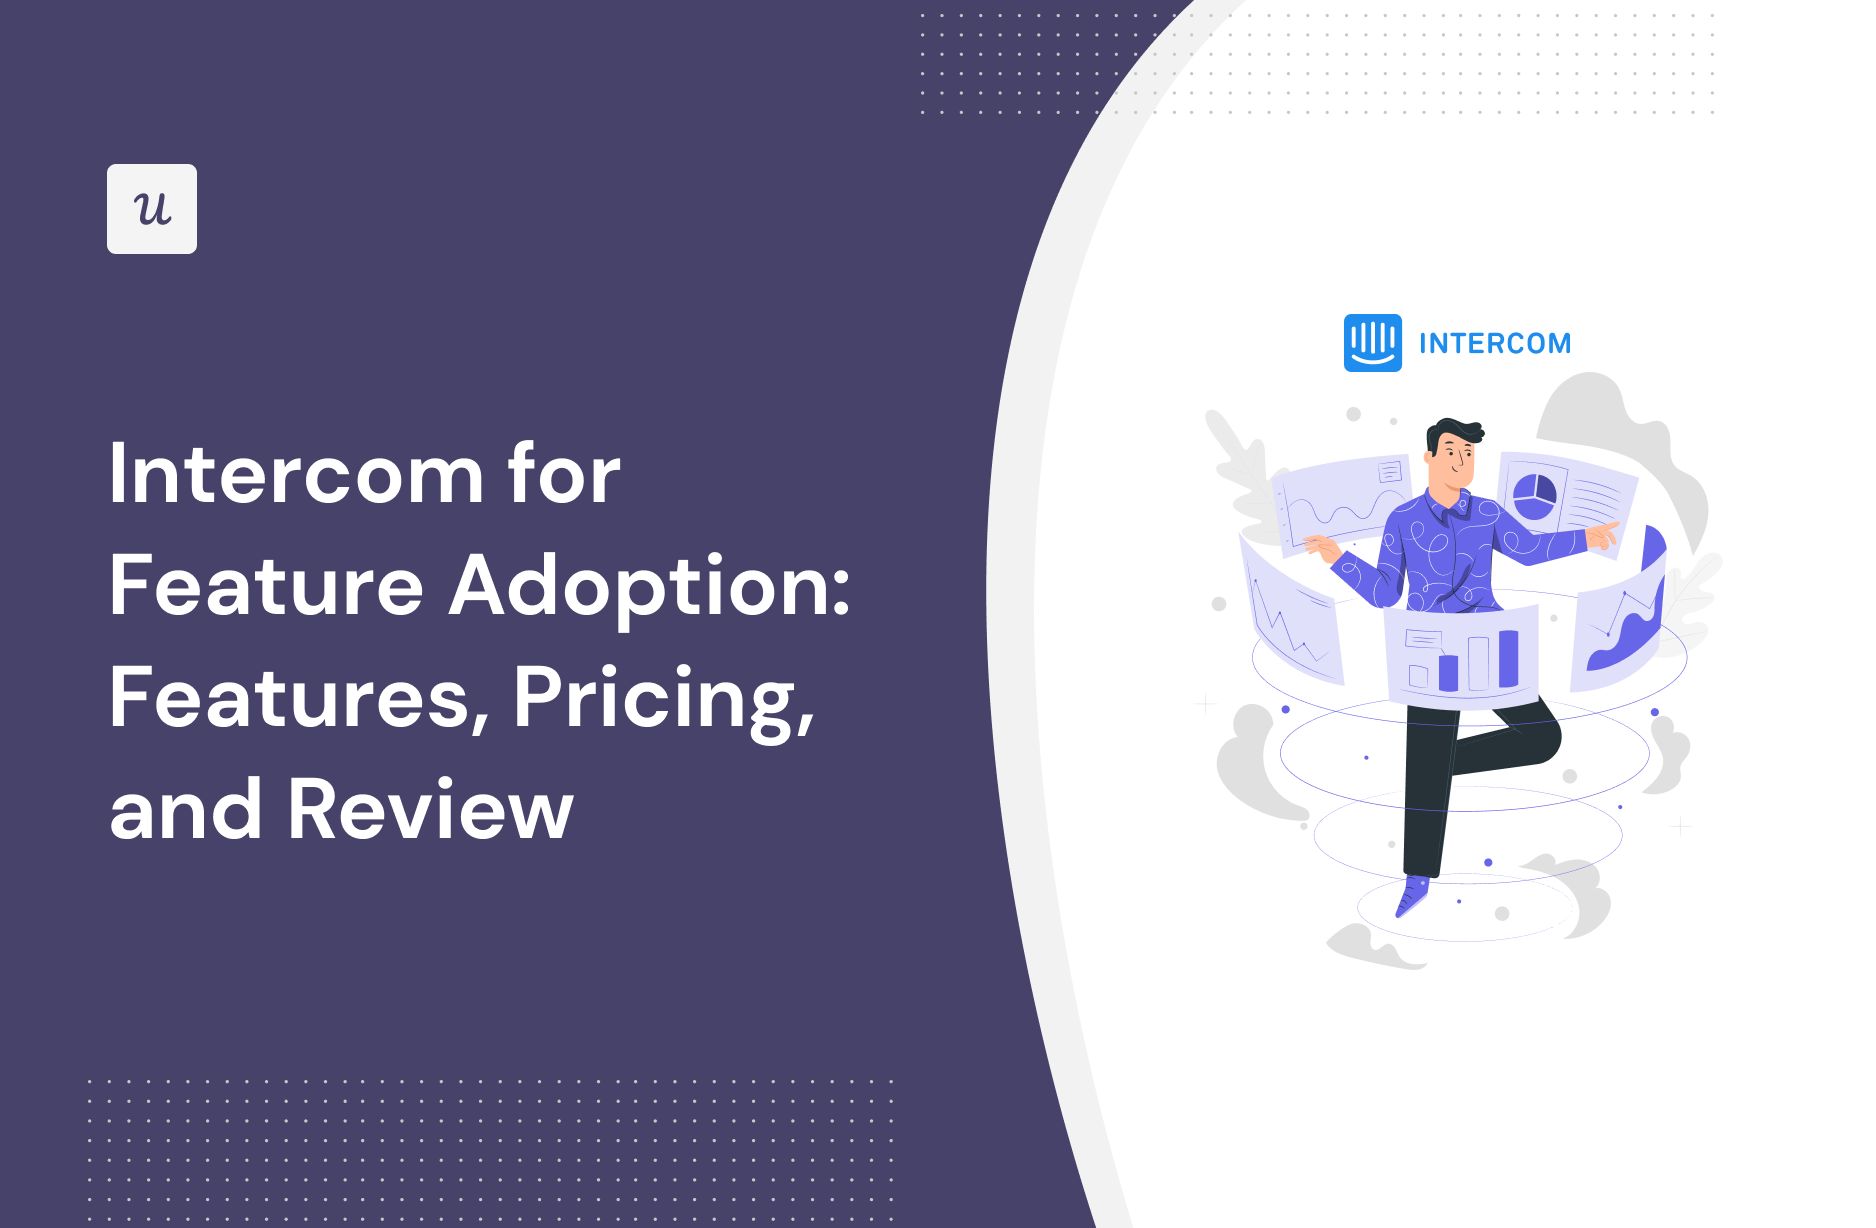 Intercom for Feature Adoption: Features, Pricing, and Review